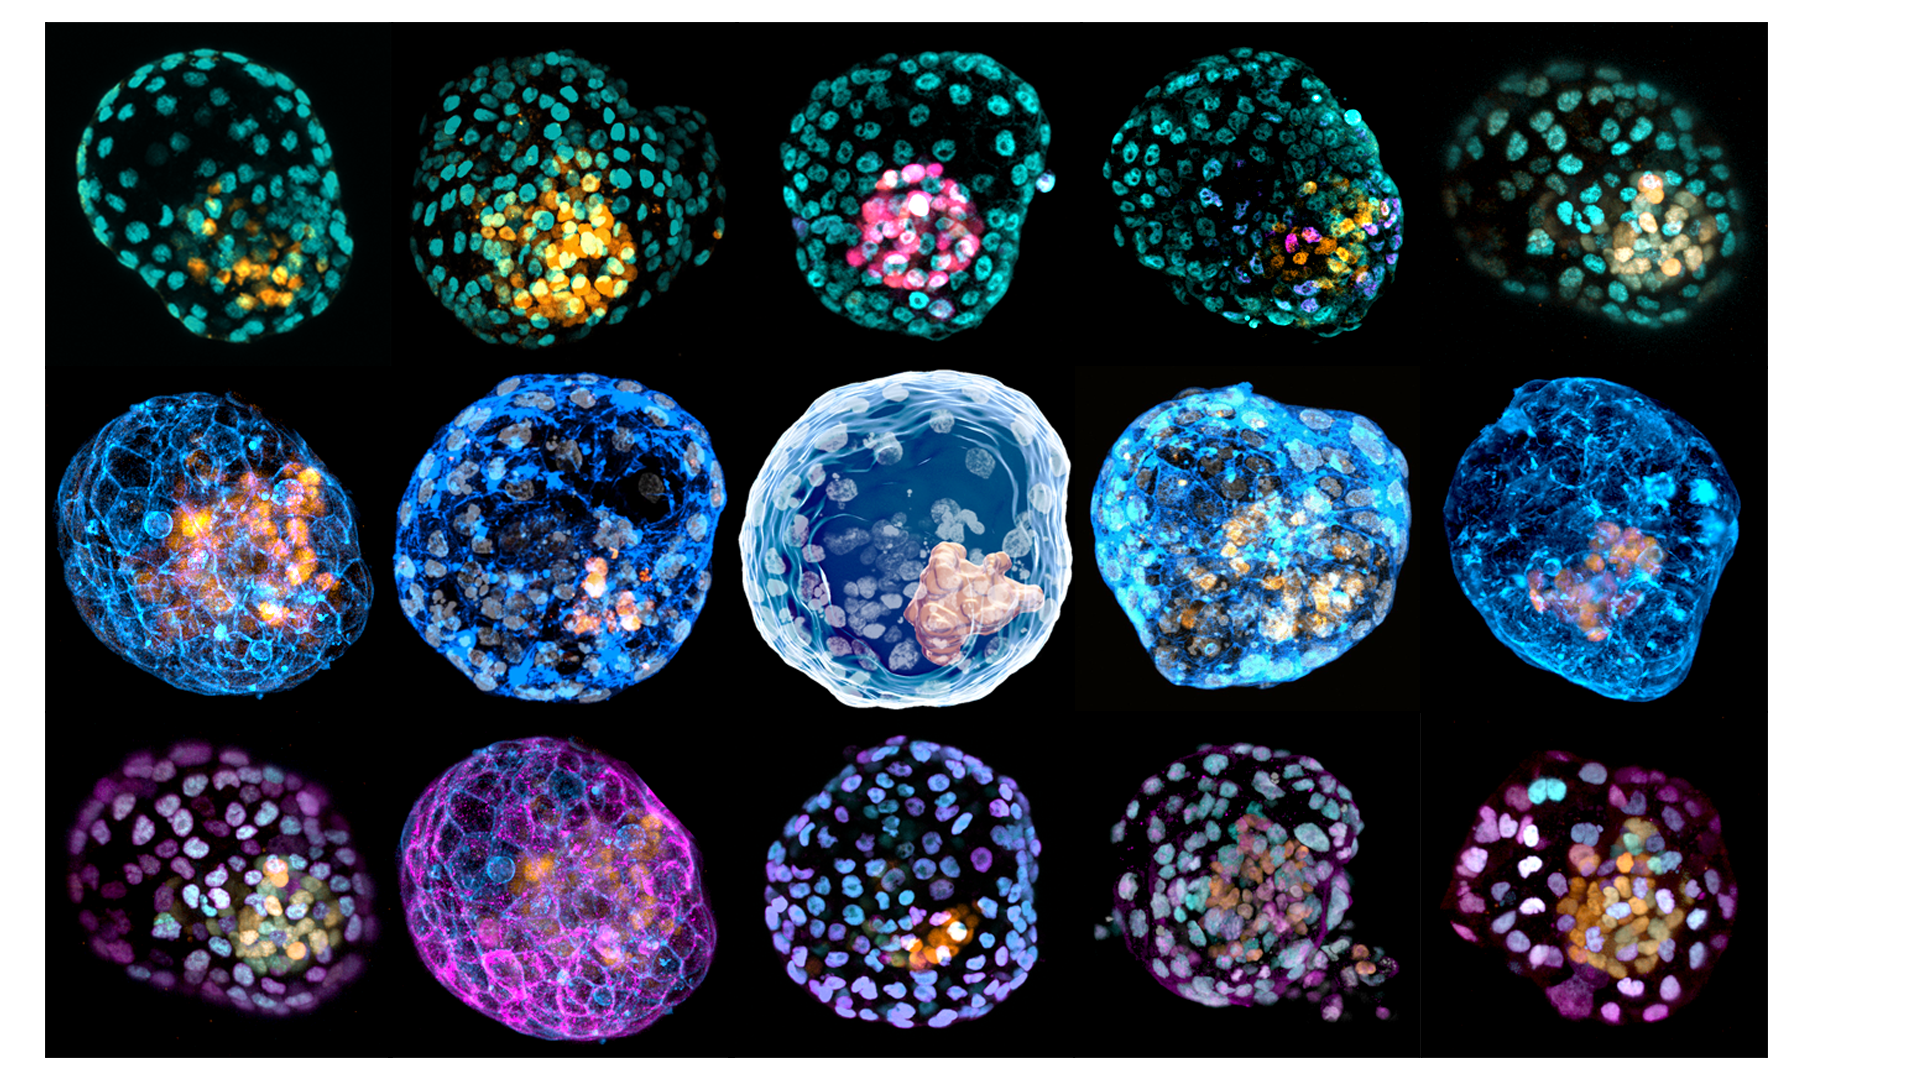 Article image for Researches create human embryos from skin cells in major scientific breakthrough